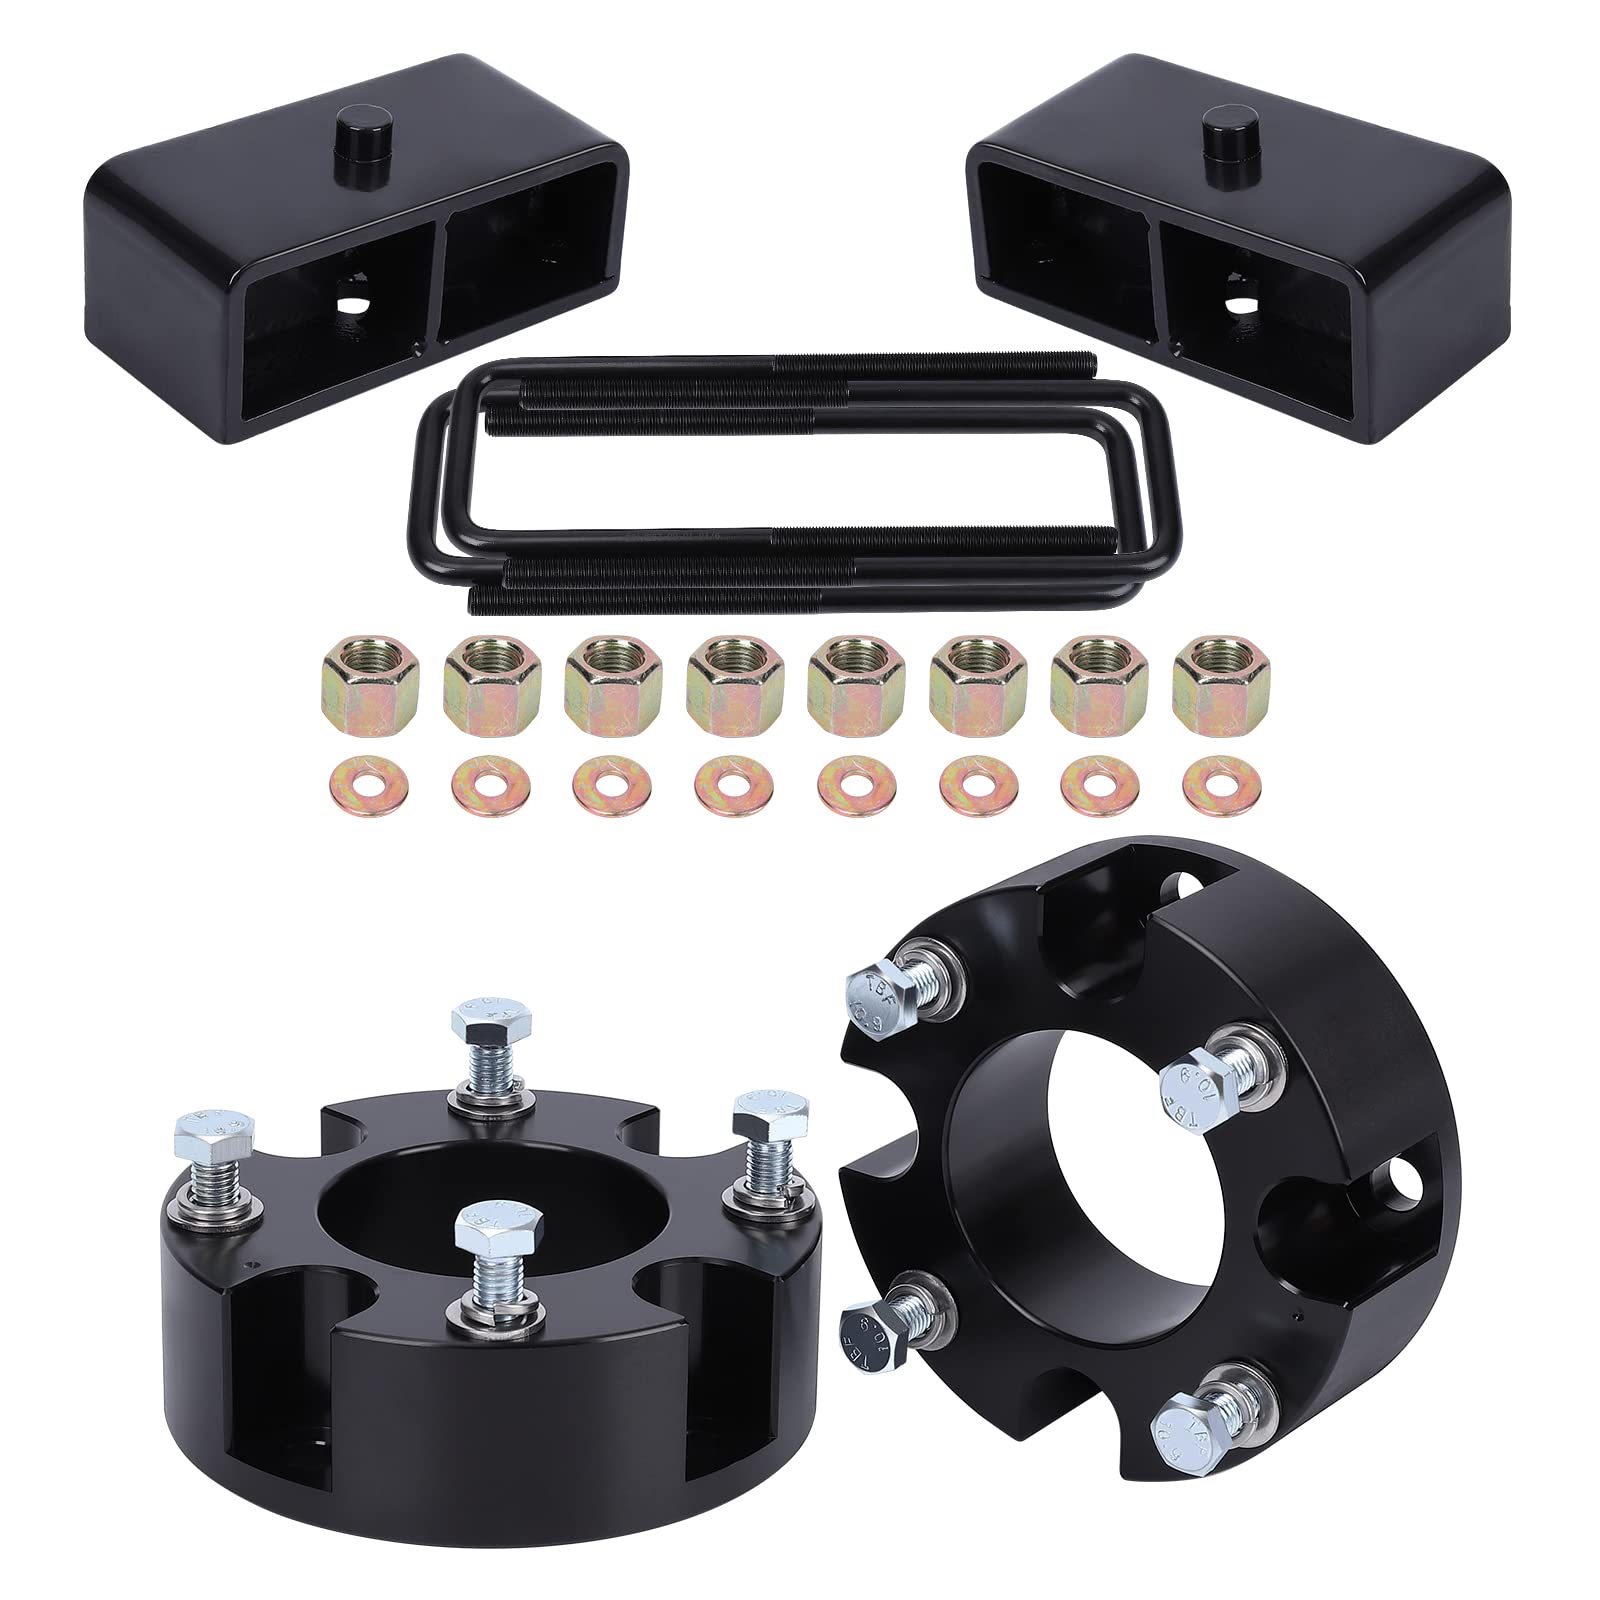 GARVEE Tundra 3 inch Front & 2 inch Rear Leveling lift kit T6 Aircraft Billet Strut Spacers Lift Blocks Extended U Bolts